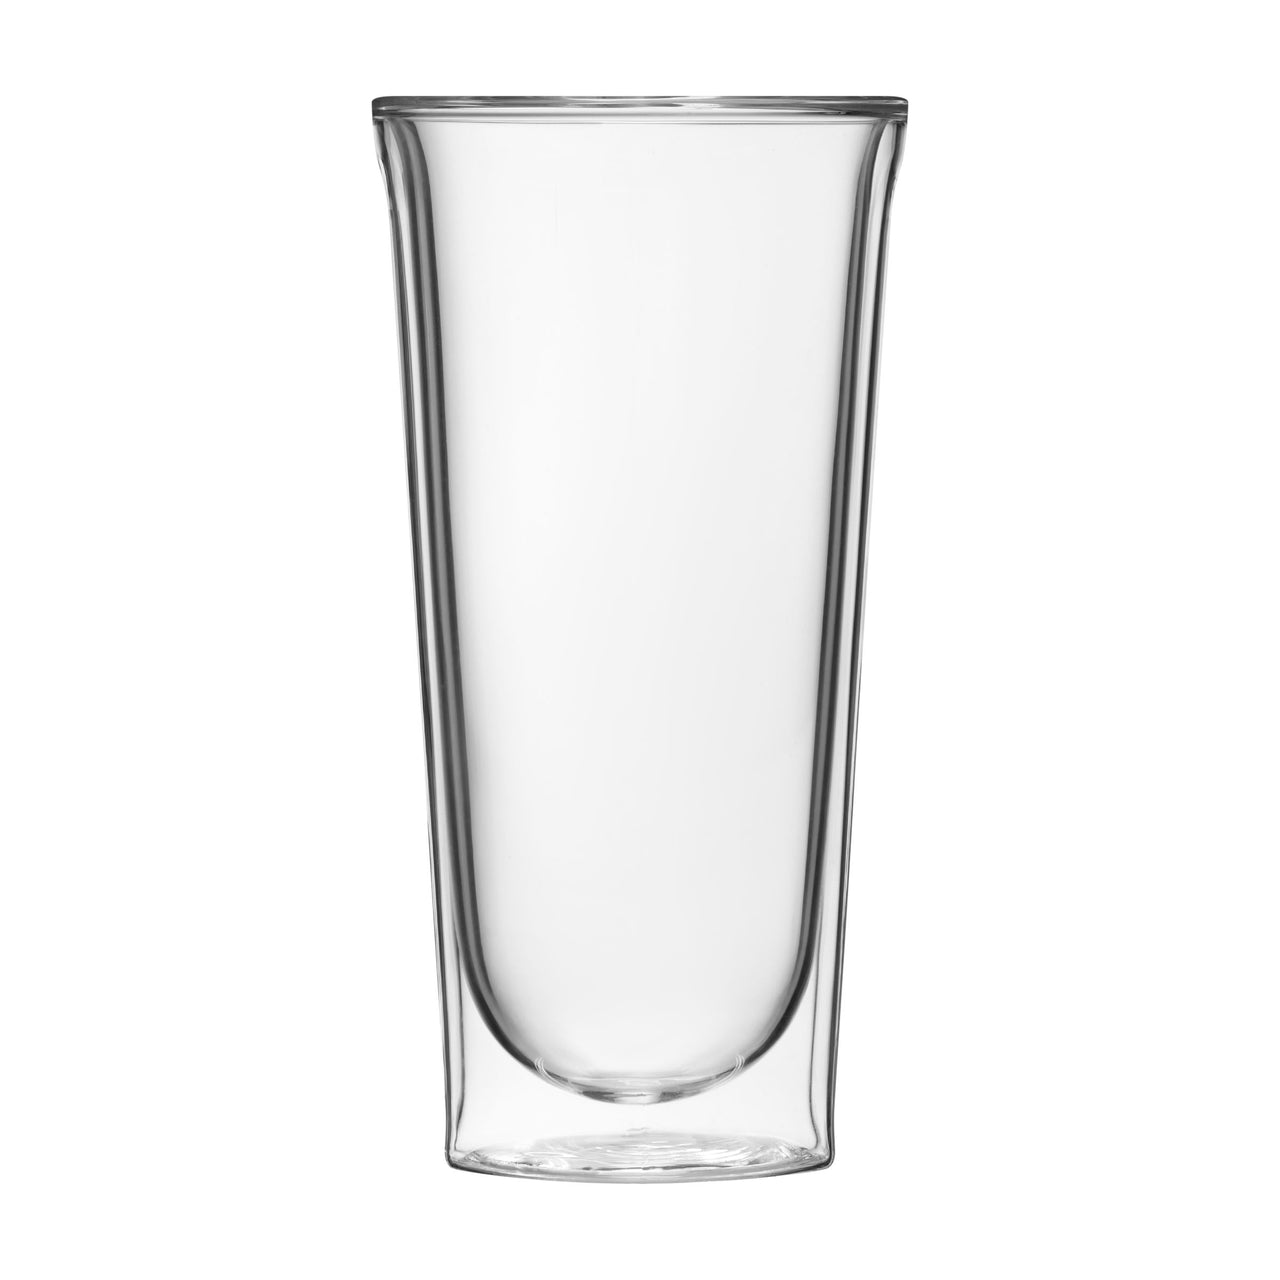 CORKCICLE GLASS PINT - 16OZ DOUBLE PACK